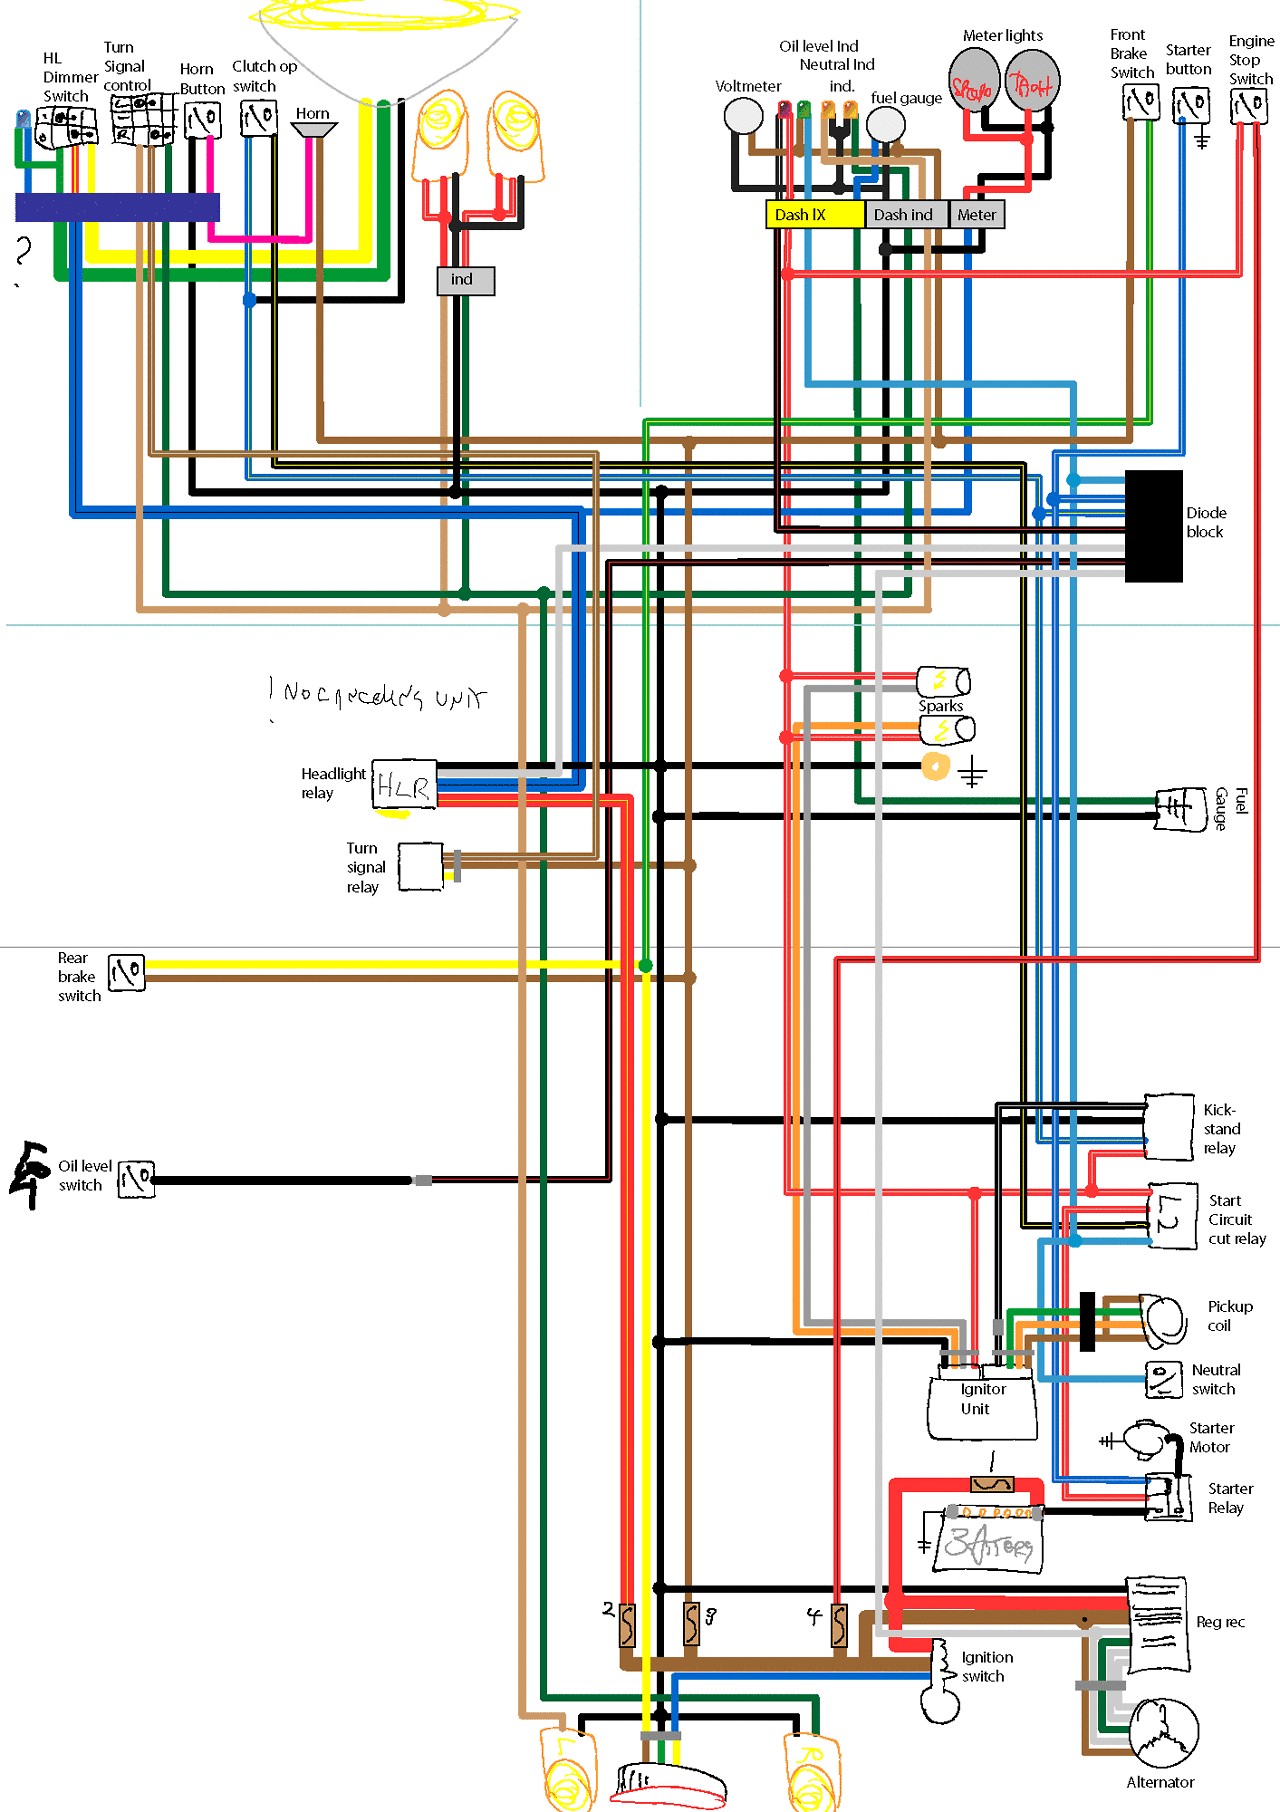 Car Schematic Diagram Land Rover Discovery Wiring Diagram Of Car Schematic Diagram